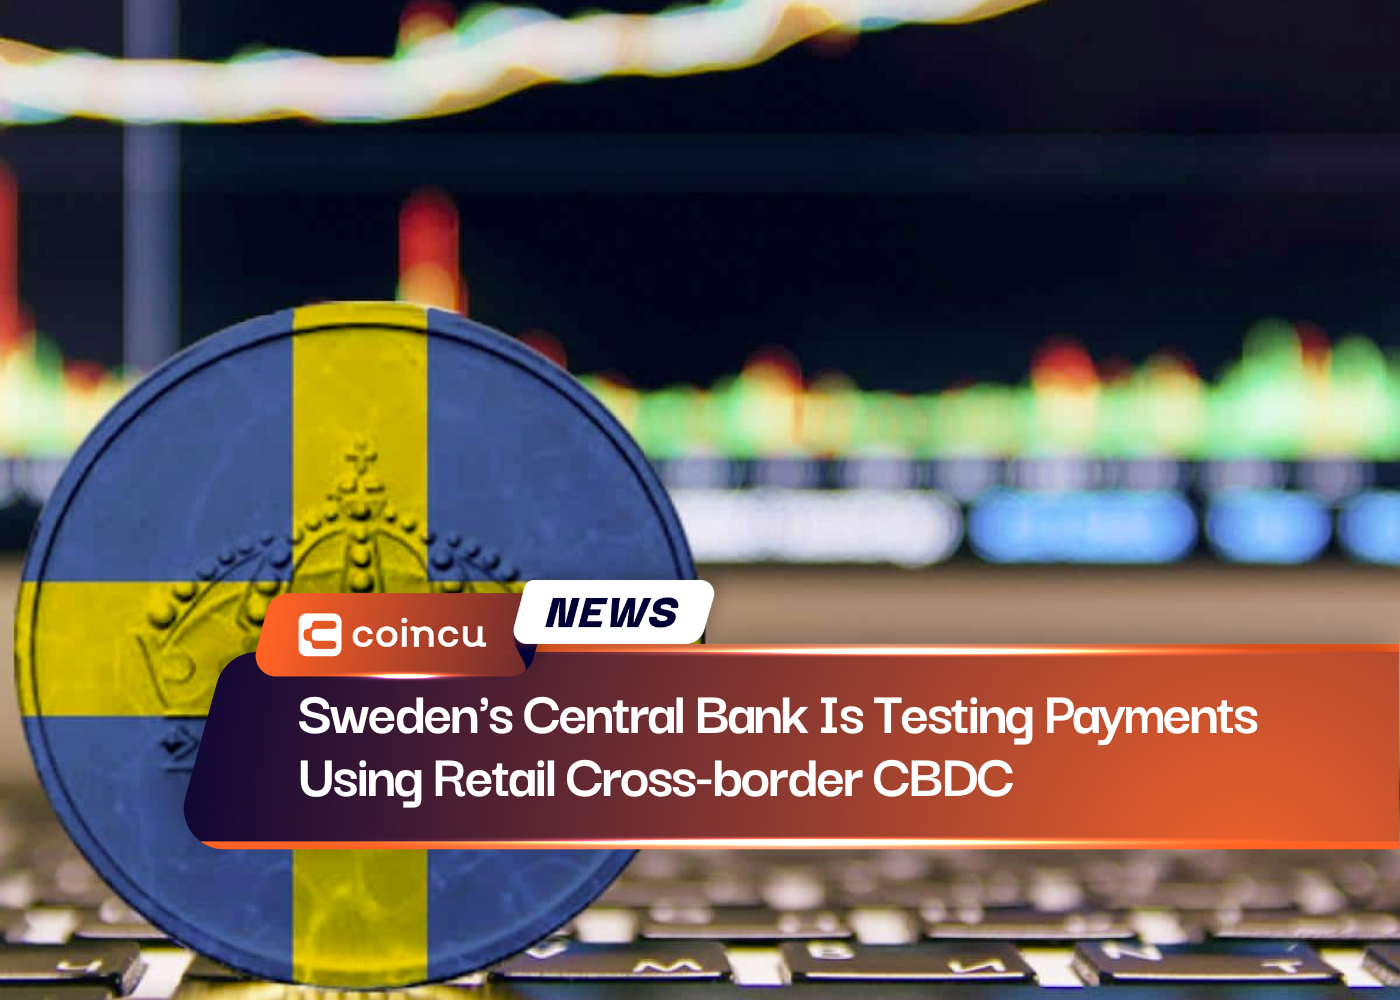 Sweden's Central Bank Is Testing Payments Using Retail Cross-border CBDC